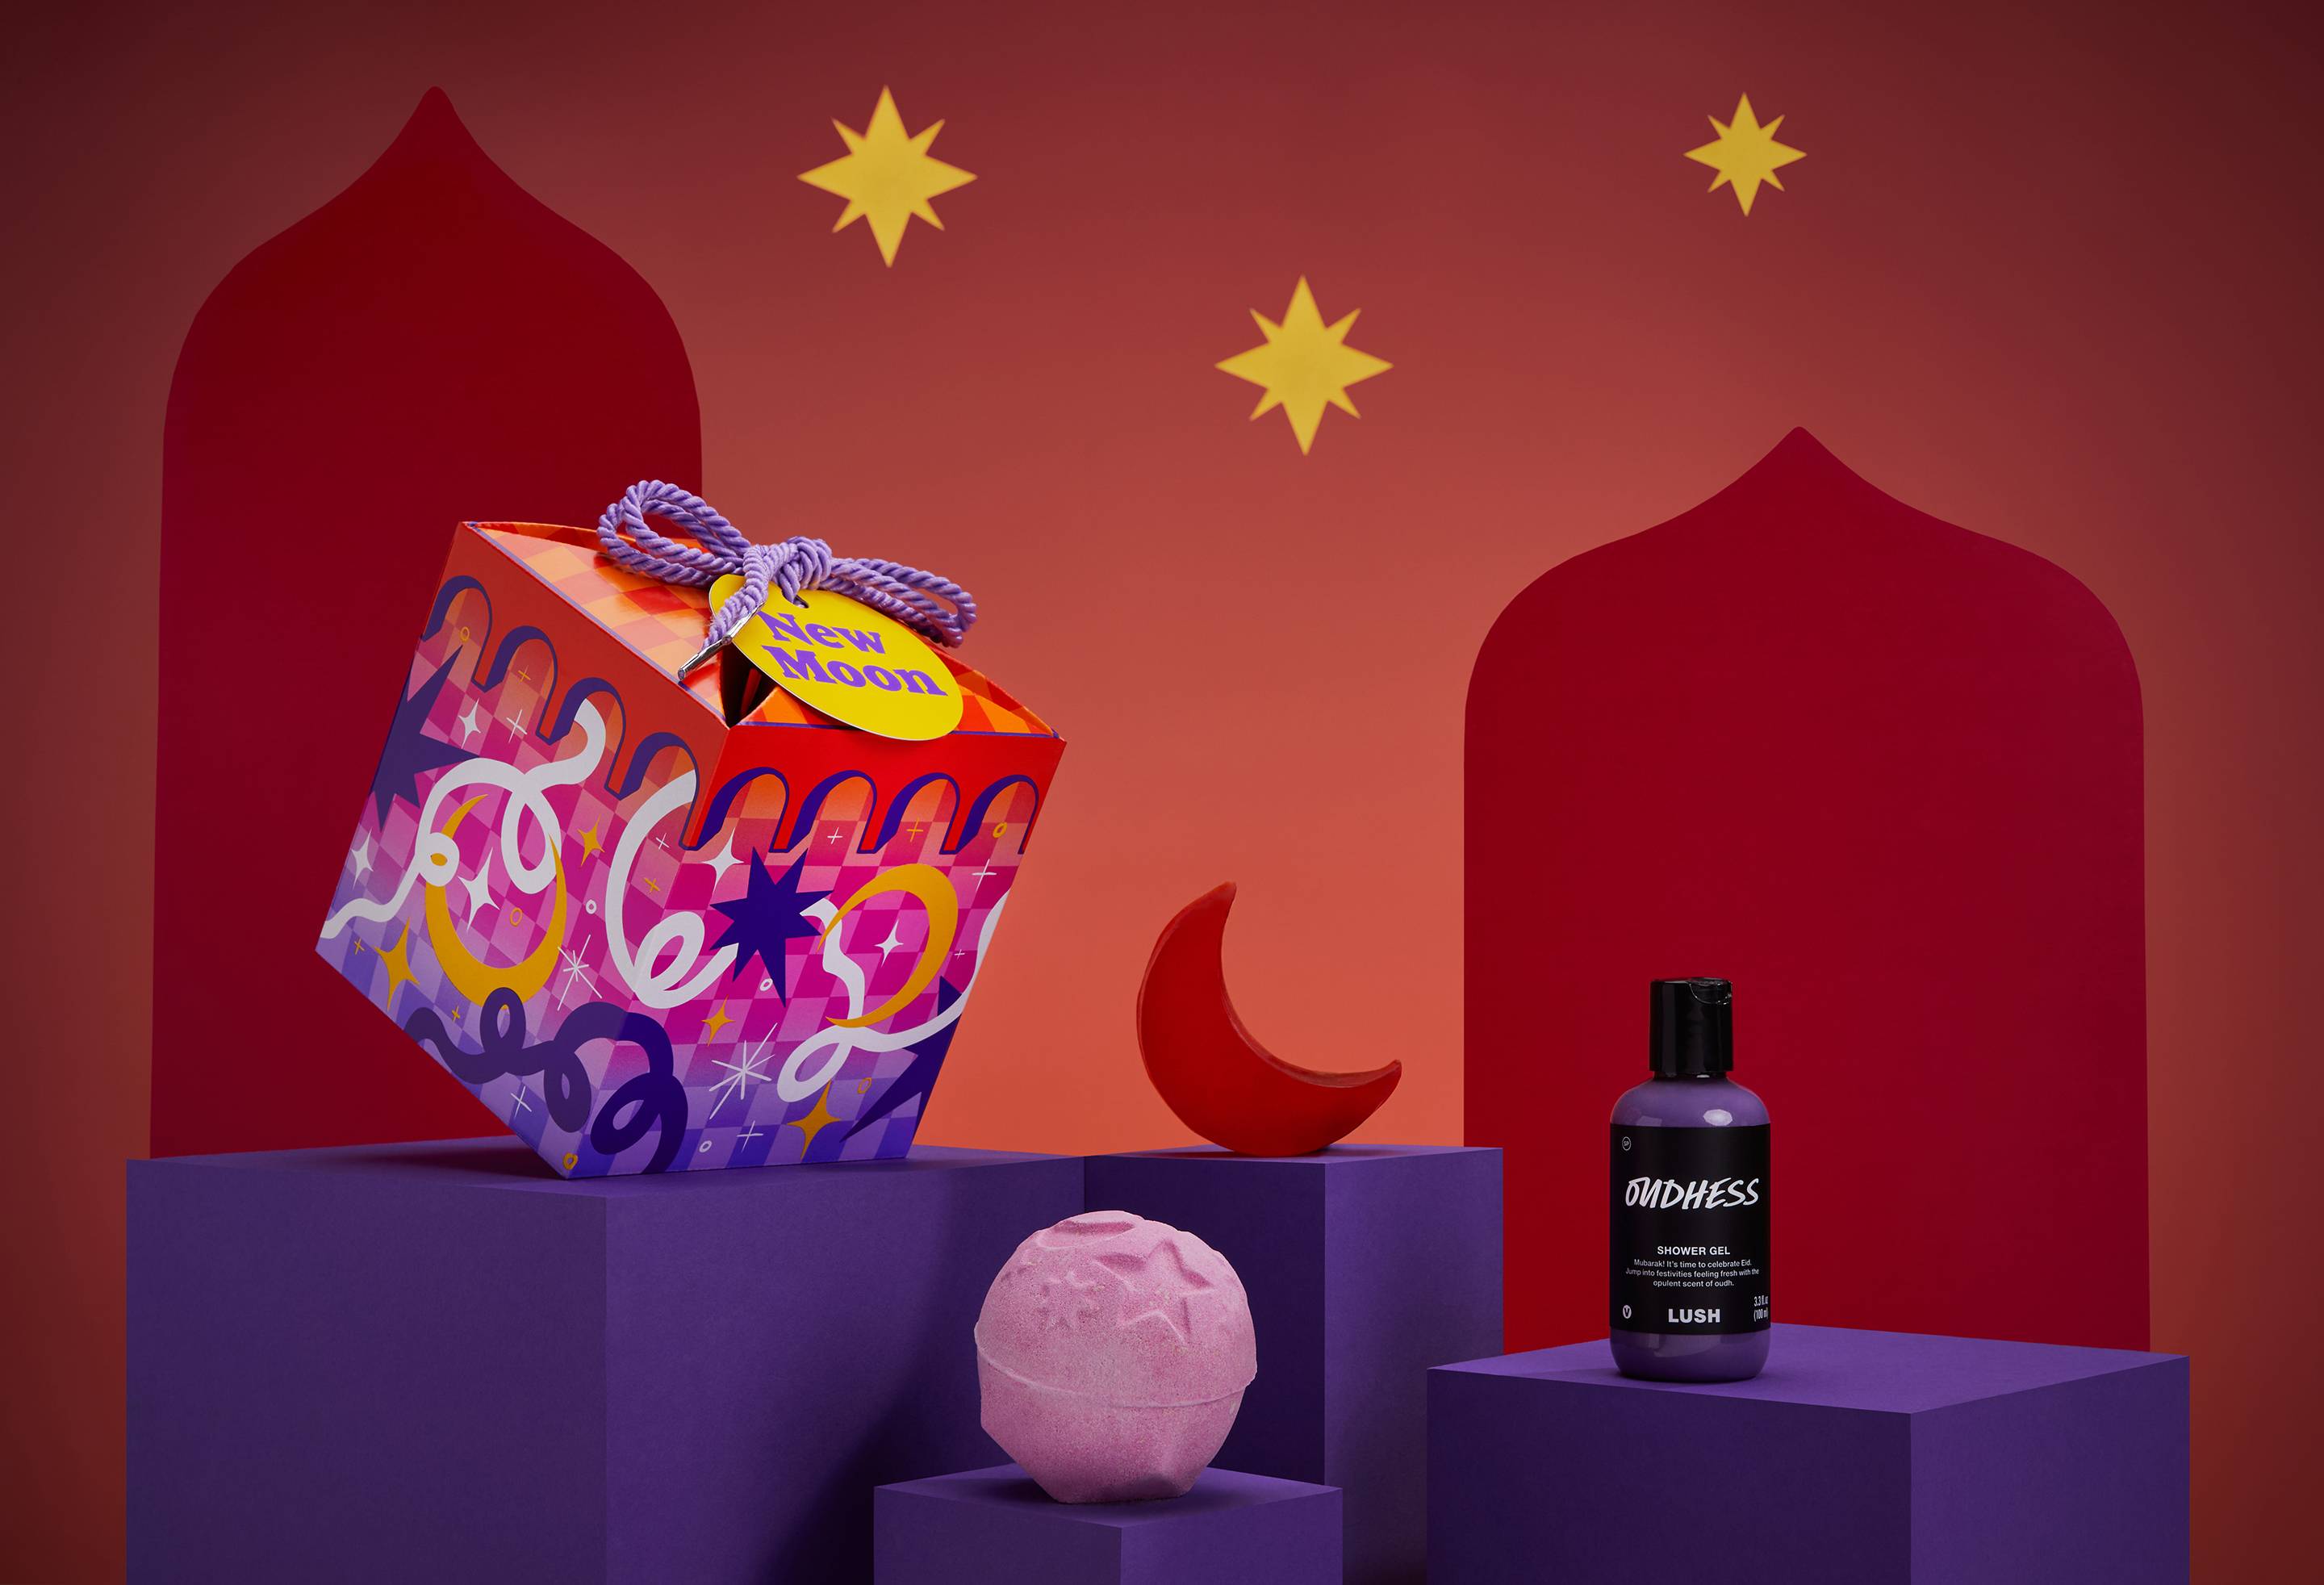 The image shows the New Moon gift box on a purple platform with three Eid-themed products on a red starry background.